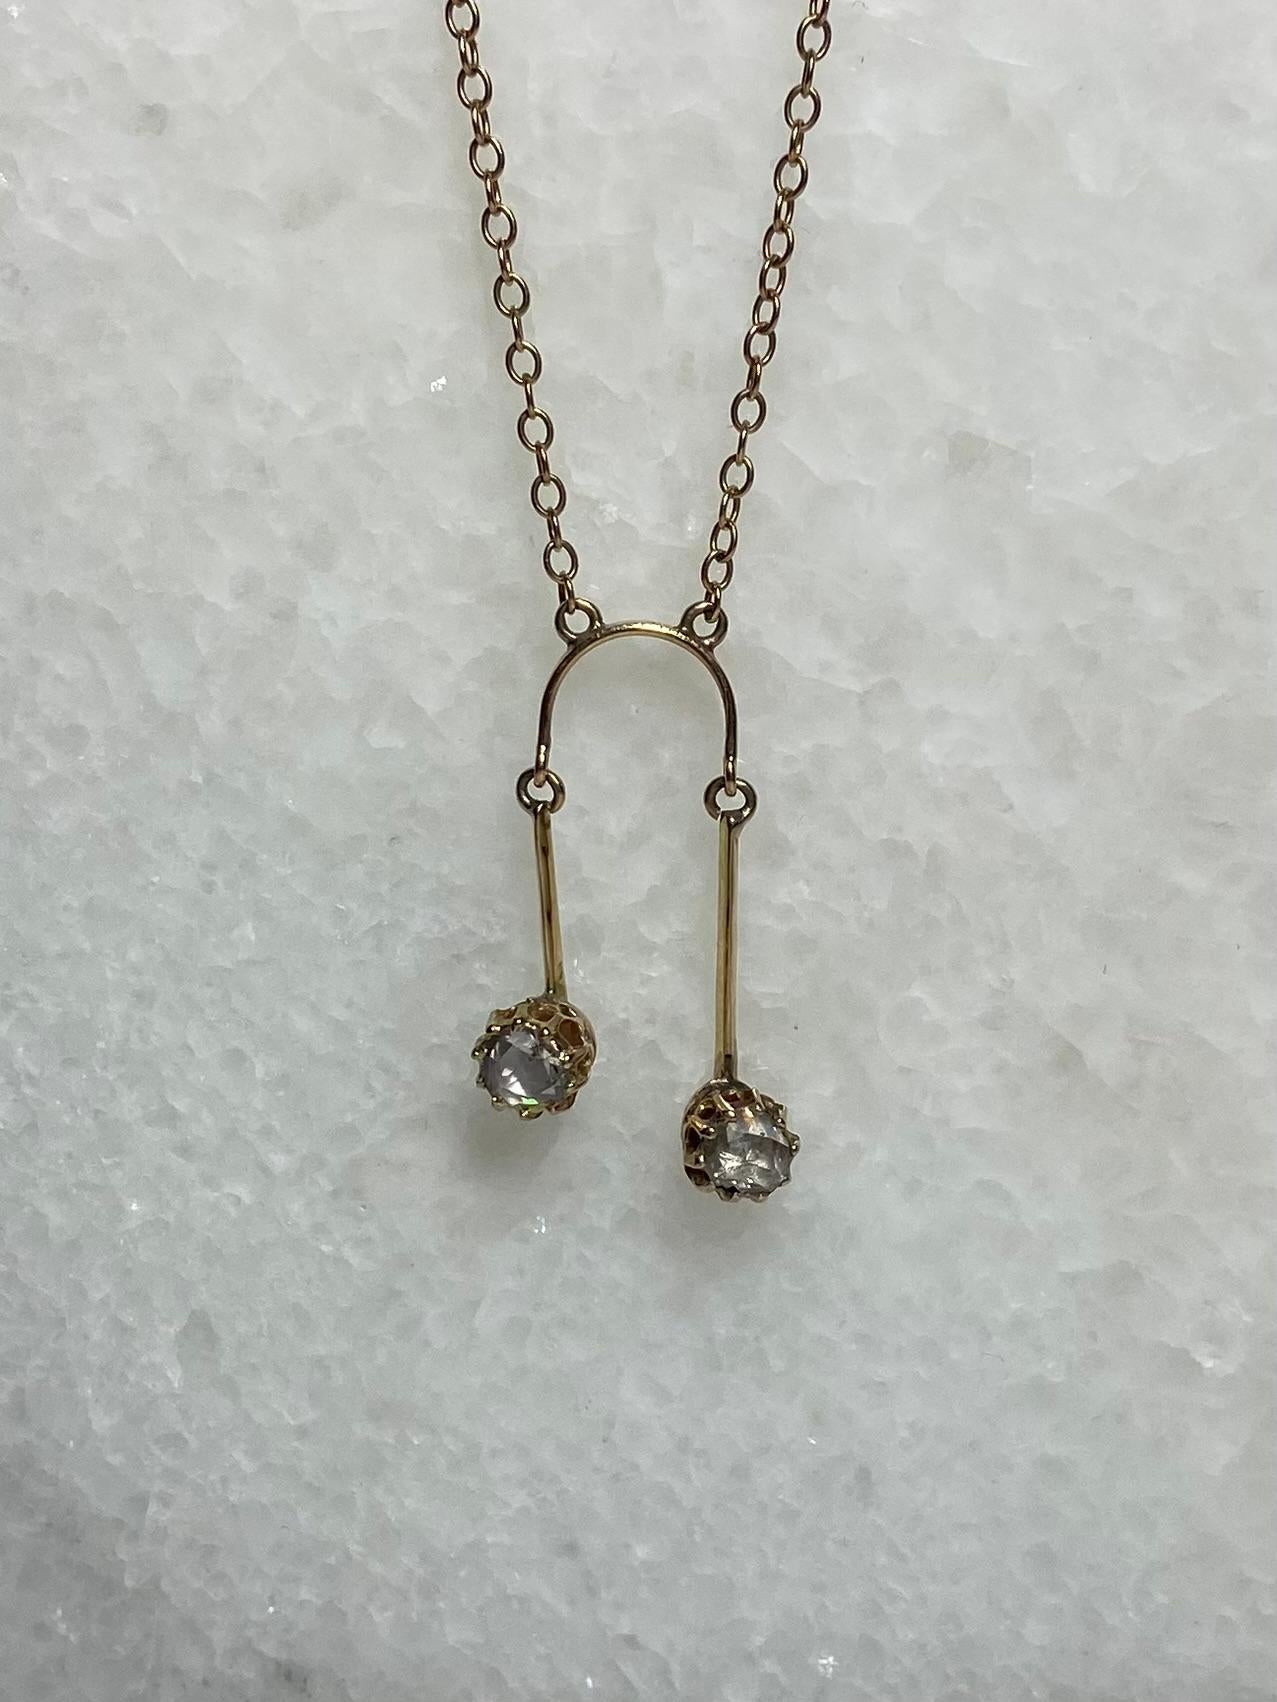 Pre-loved Necklace 14 carat gold toi&moi with rose cut diamonds with 0.24 carat.

This is a gorgeous necklace from the 1950S with a bow shaped middle part. The middle part has 2 bars set with 2 rose cut diamonds with a carat of about 0, 12 each. The